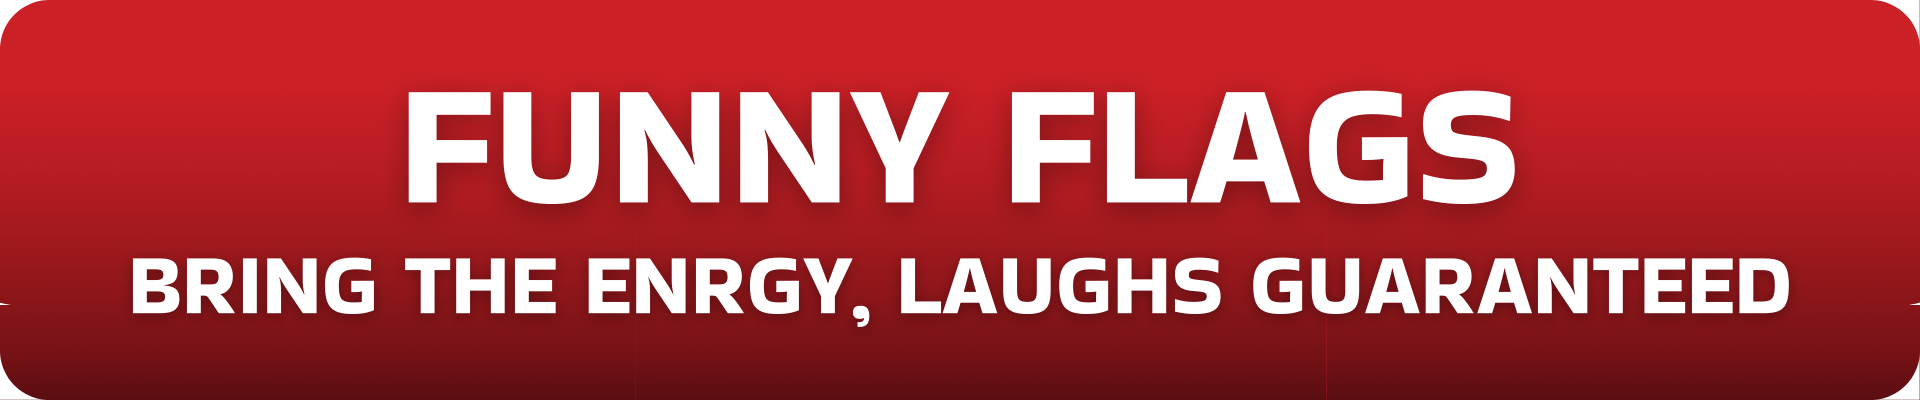 Banner for Funny Flags category with the slogan 'BRING THE ENERGY, LAUGHS GUARANTEED' against a red background, highlighting humor-themed flags for personalizing dorm rooms